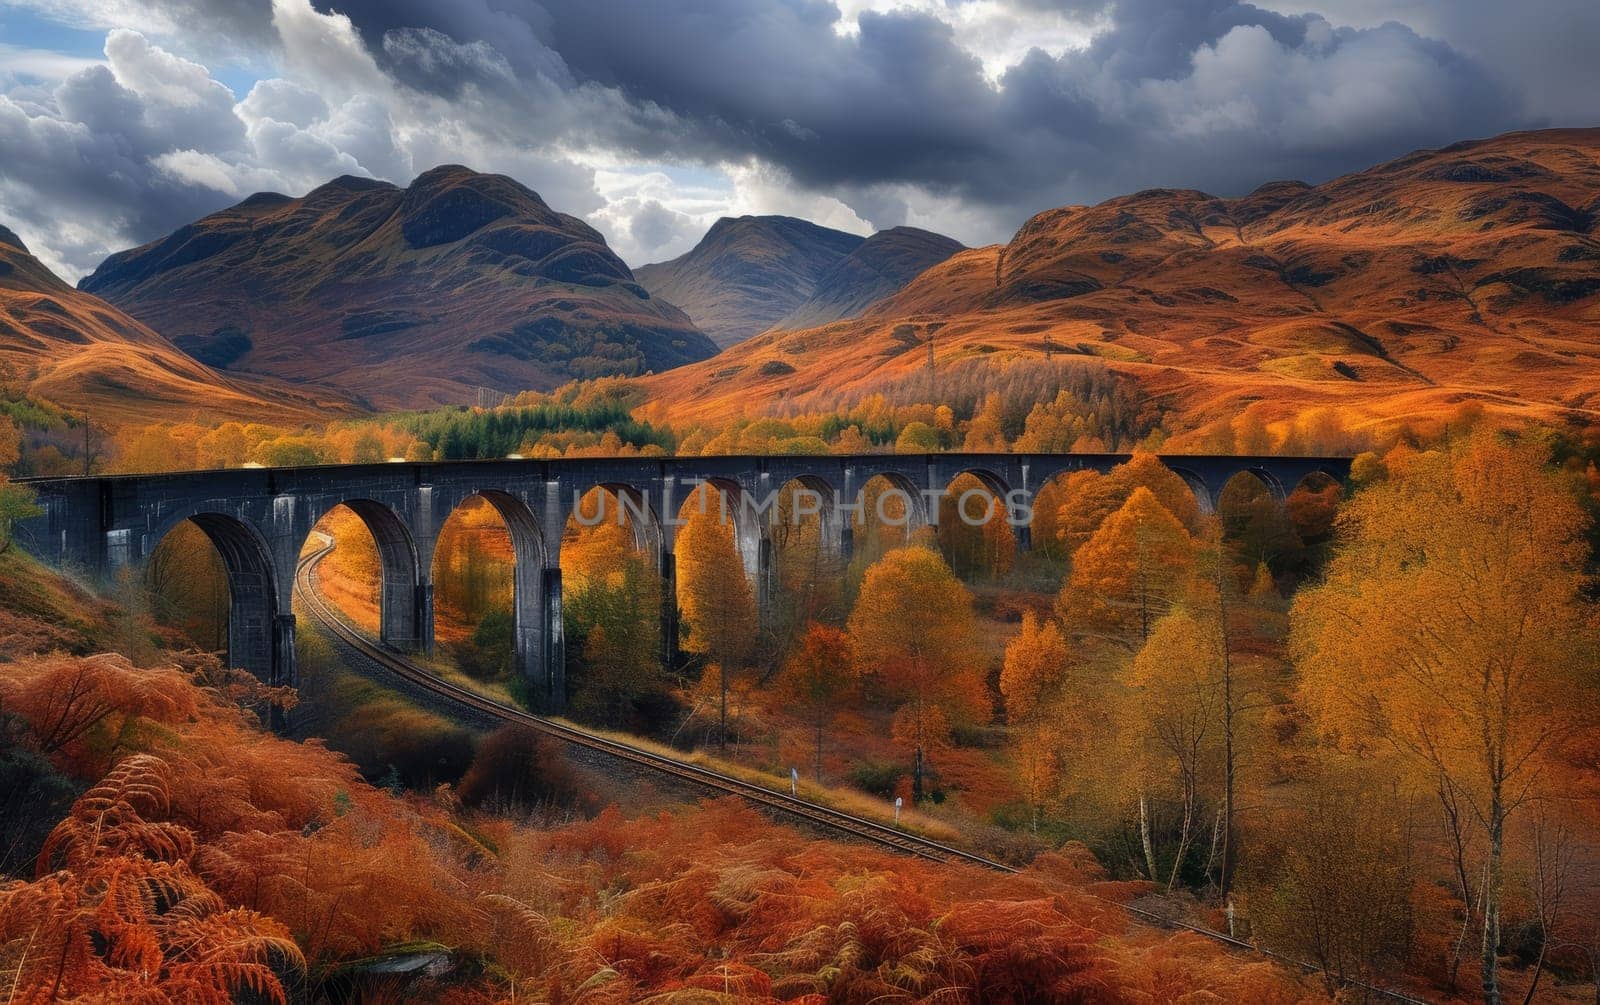 Majestic viaduct arching over a landscape ablaze with autumn colors under a dynamic sky